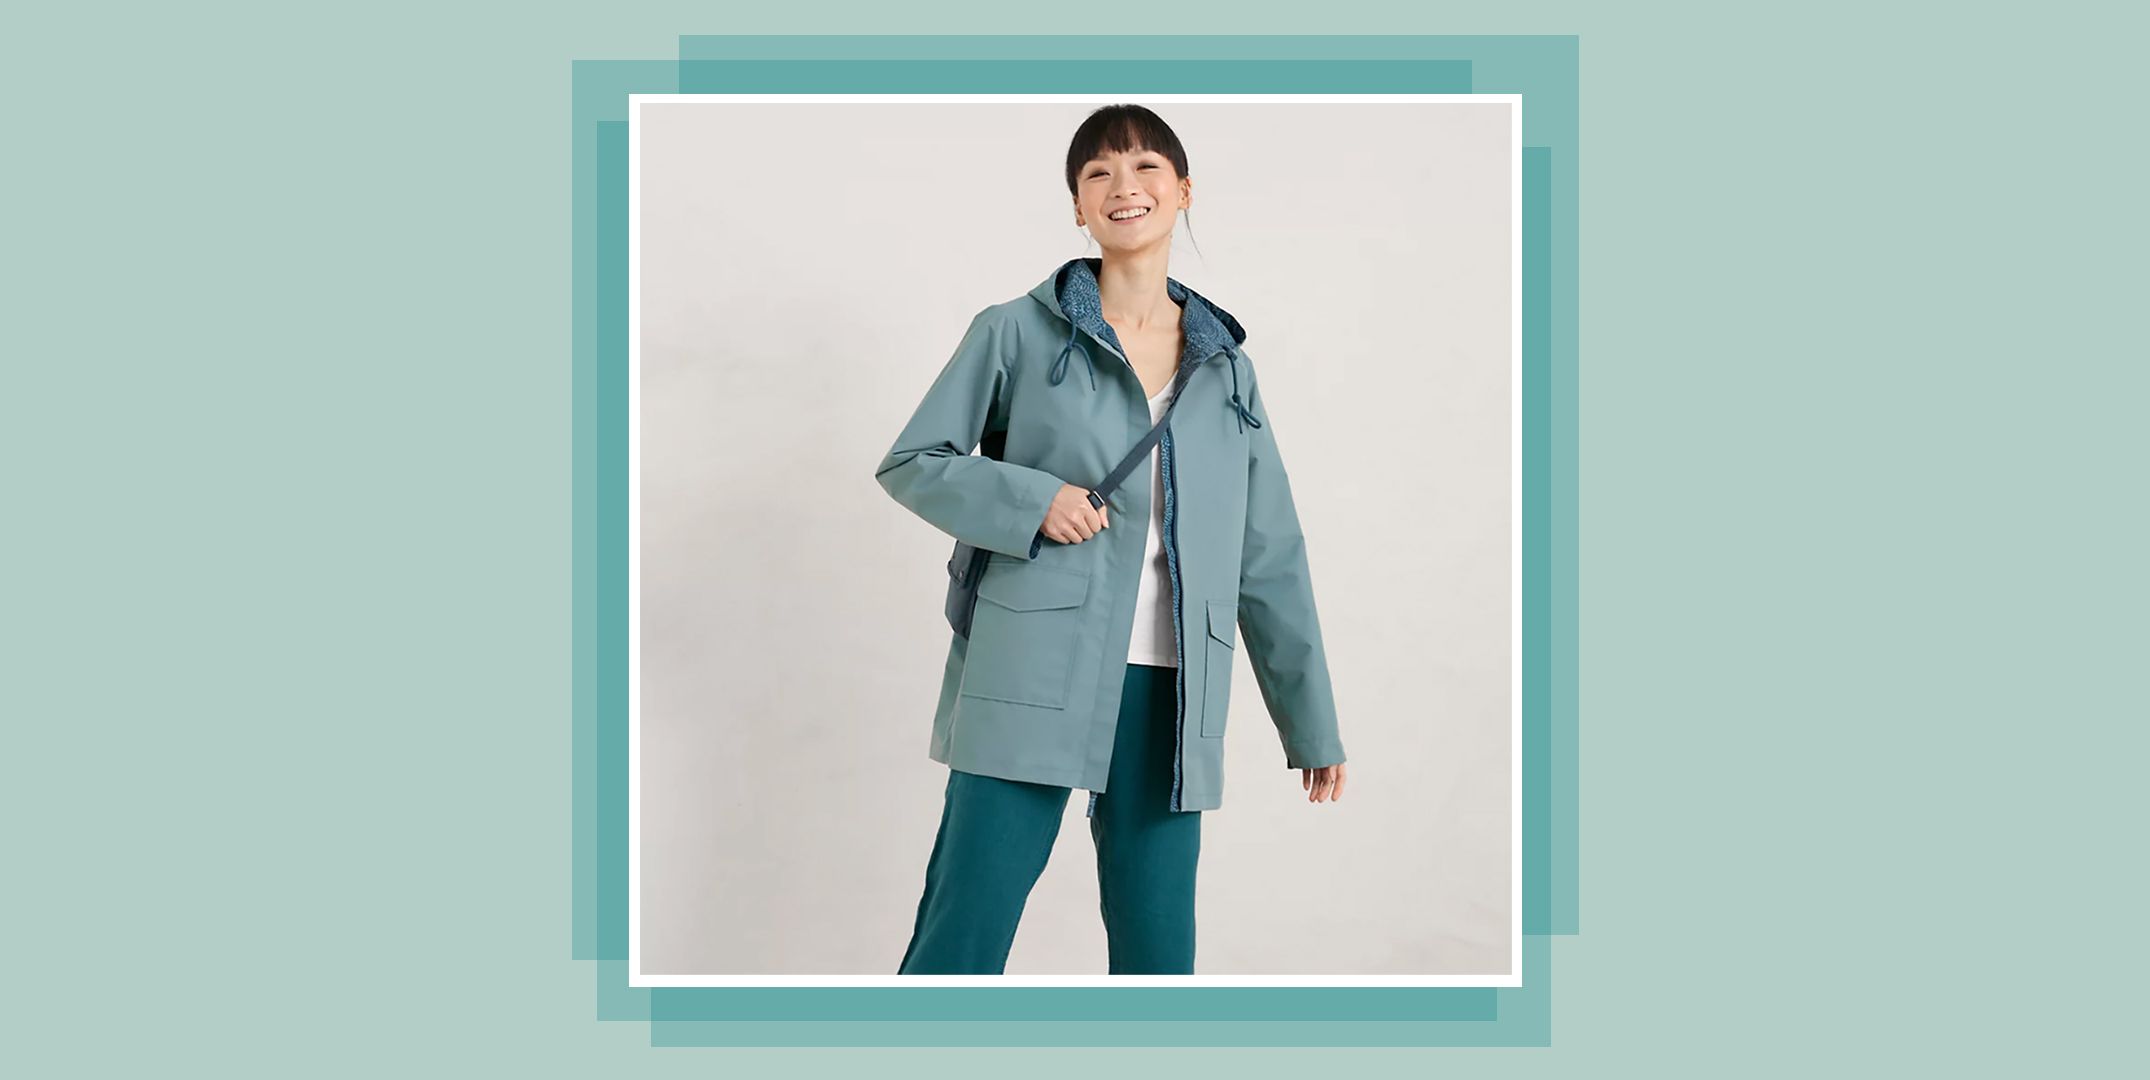 Waterproof jackets for women to invest in